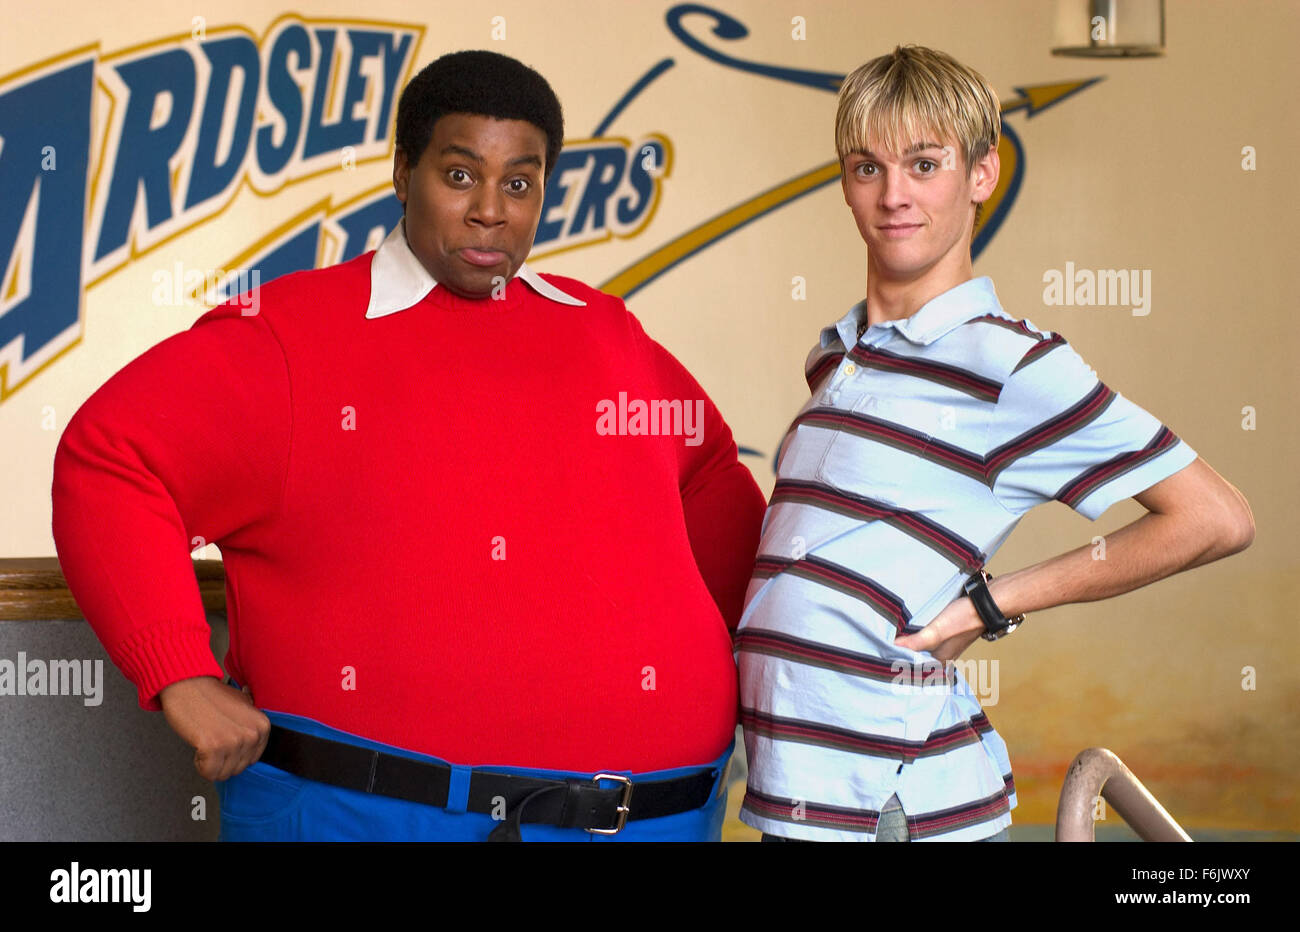 RELEASE DATE: December 25, 2004. MOVIE TITLE: Fat Albert. STUDIO: 20th Century Fox. PLOT: An obese boy named Fat Albert and his friends Rudy, Mushmouth, Bill, Dumb Donald, Russell, and Weird Harold, pulls into trouble when theyfall out of their TV world into the real world, where Fat Albert tries to help a young girl, Doris, make friends. However, the simple life of the group is interrupted when Fat Albert falls for Doris' older sister, Lauri, sparking his friends to worry that their leader may never want to return to his cartoon world again. PICTURED: KENAN THOMPSON stars as Fat Albert wit Stock Photo